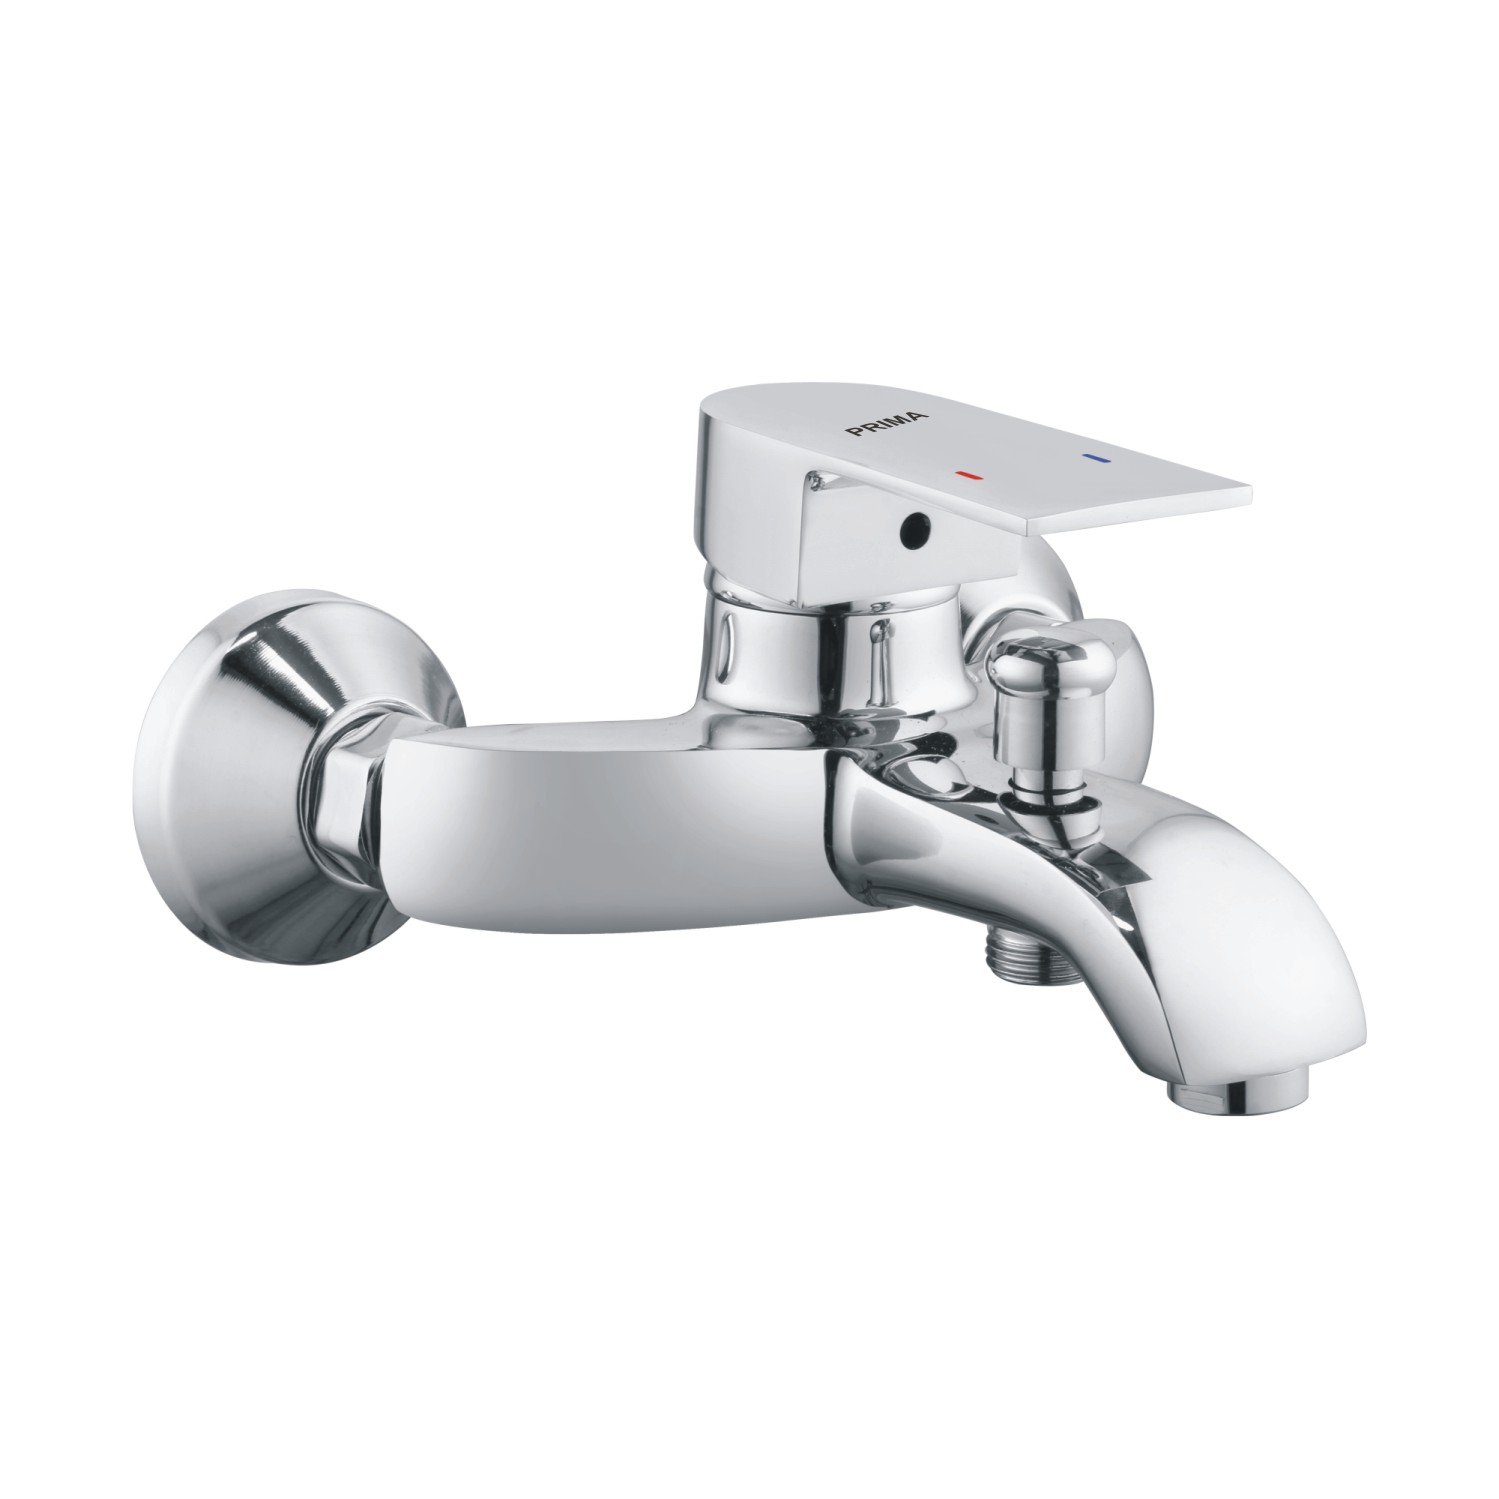 C.P Single Lever Wall Mixer with Telephonic Shower & 1.5 mtr. Tube & Stand